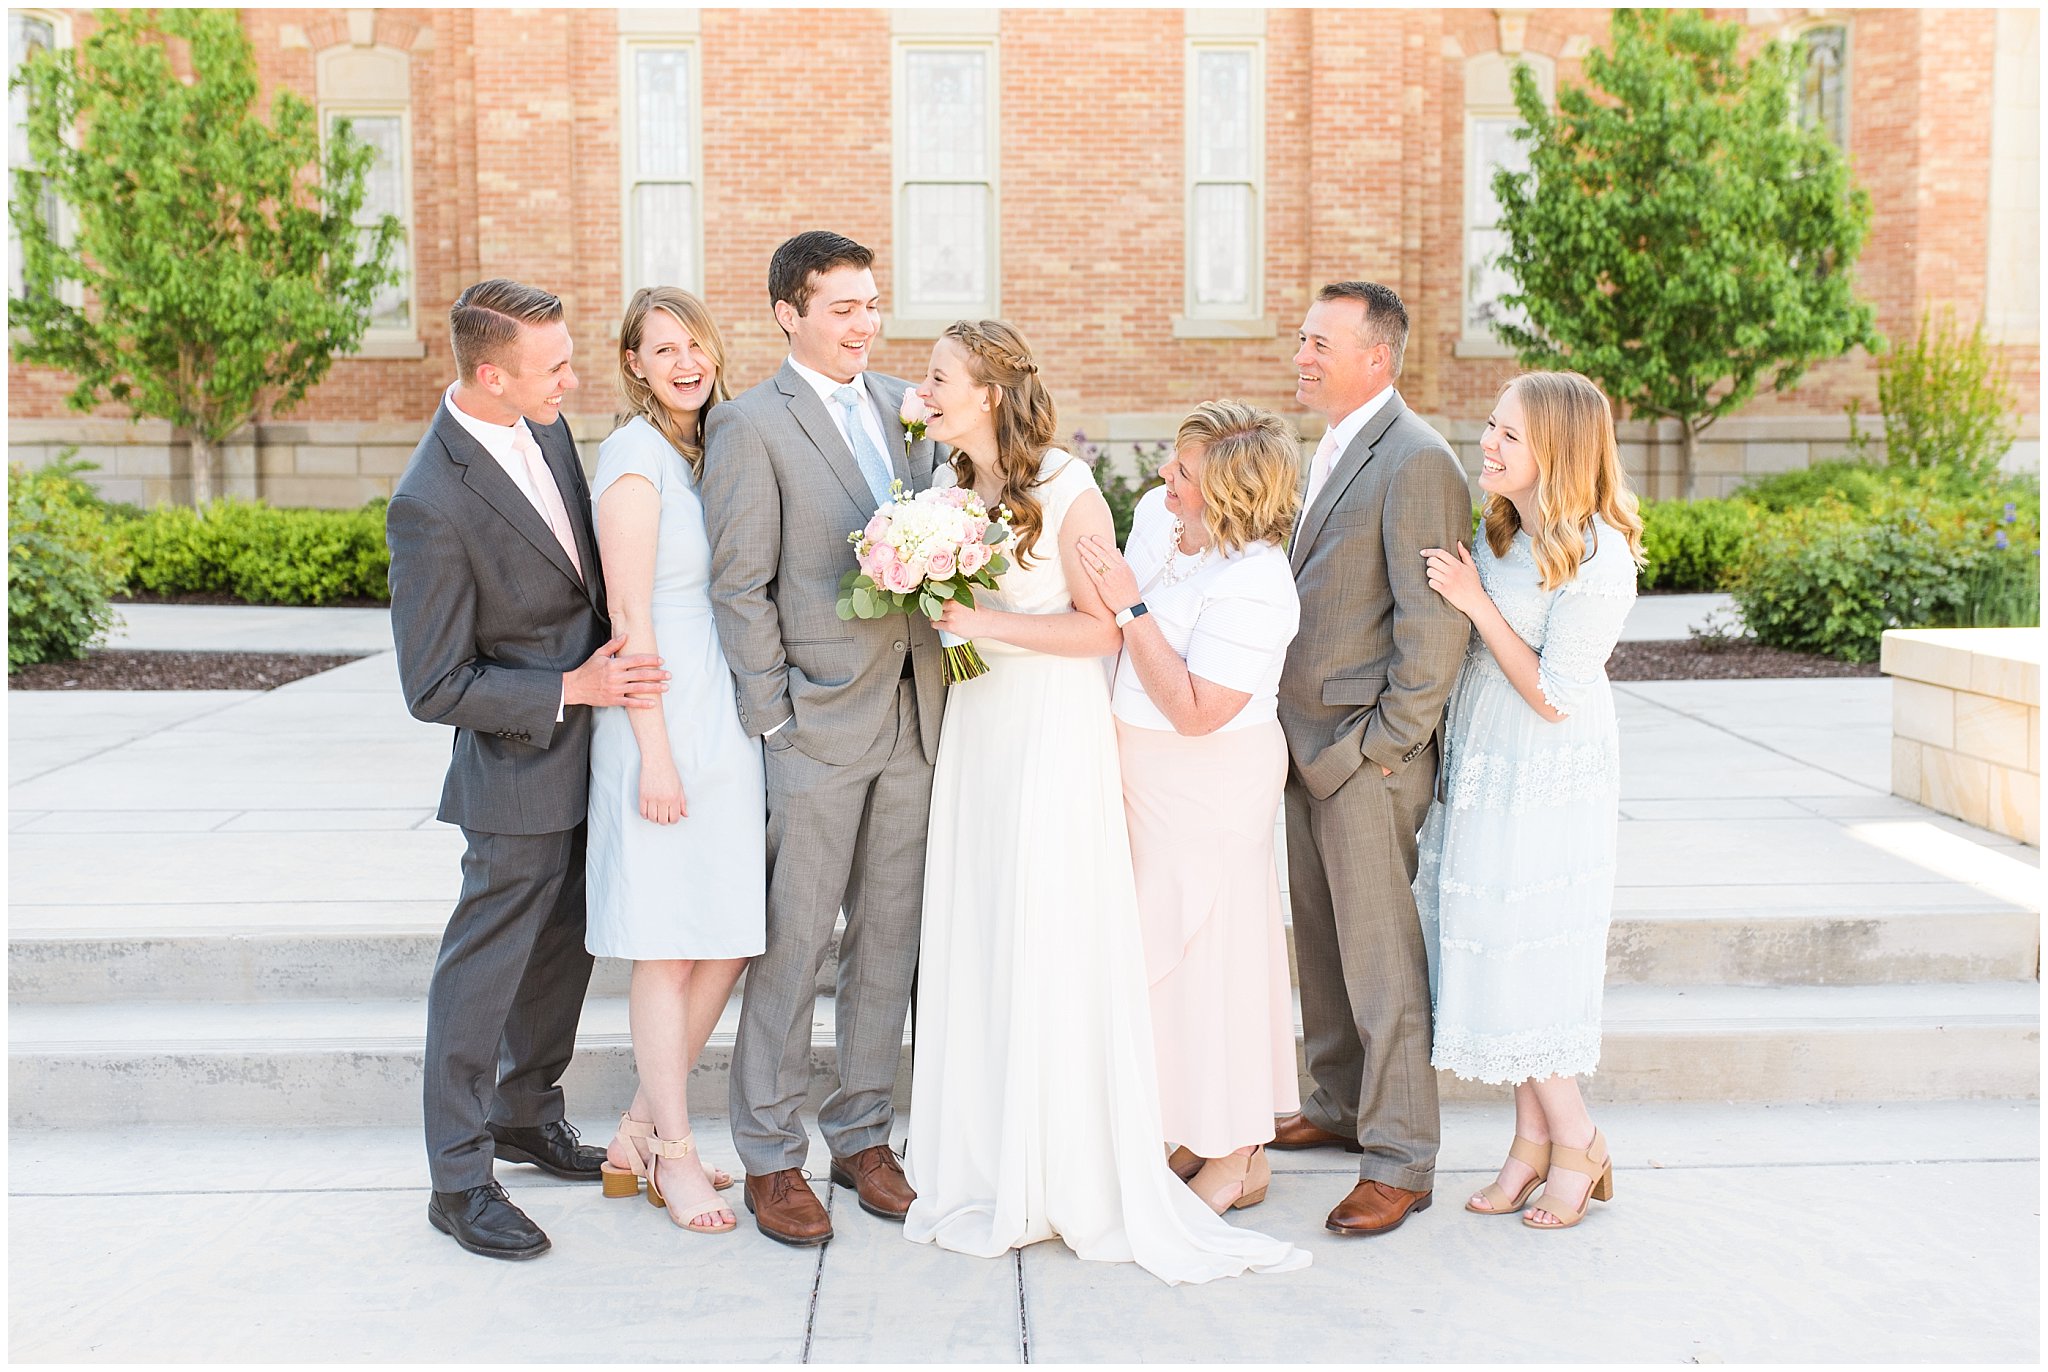 Bride and groom with family at Provo City Center temple with grey, blush, and light blue wedding colors | Spring Provo City Center Temple Wedding | Utah Wedding Photographers | Jessie and Dallin Photography